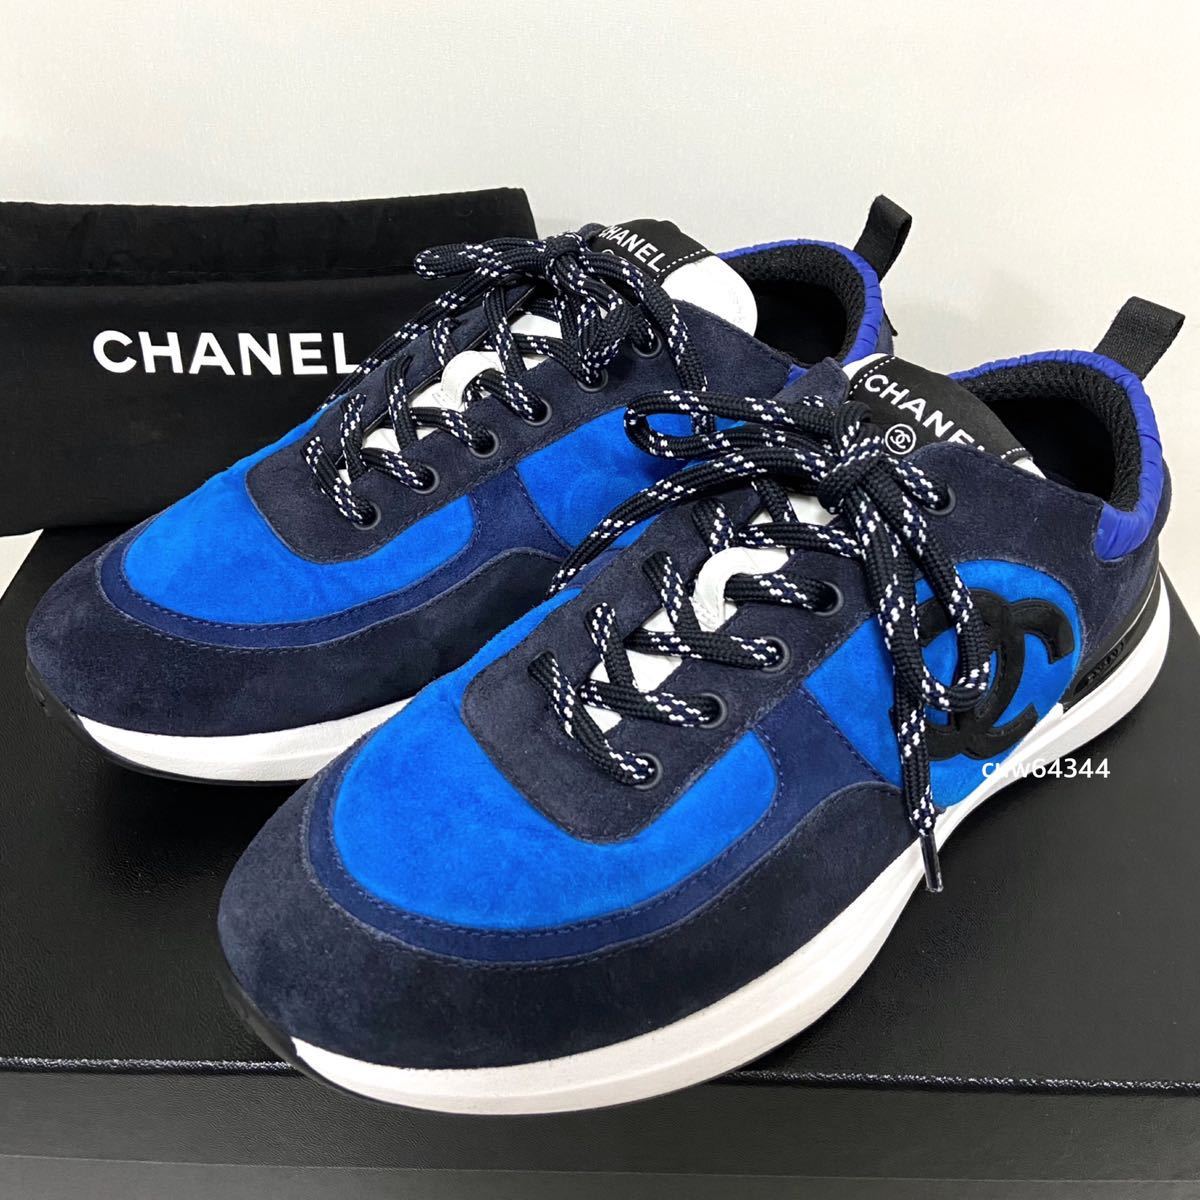 Chanel Men's Shoes   Proxy bidding and ordering service for